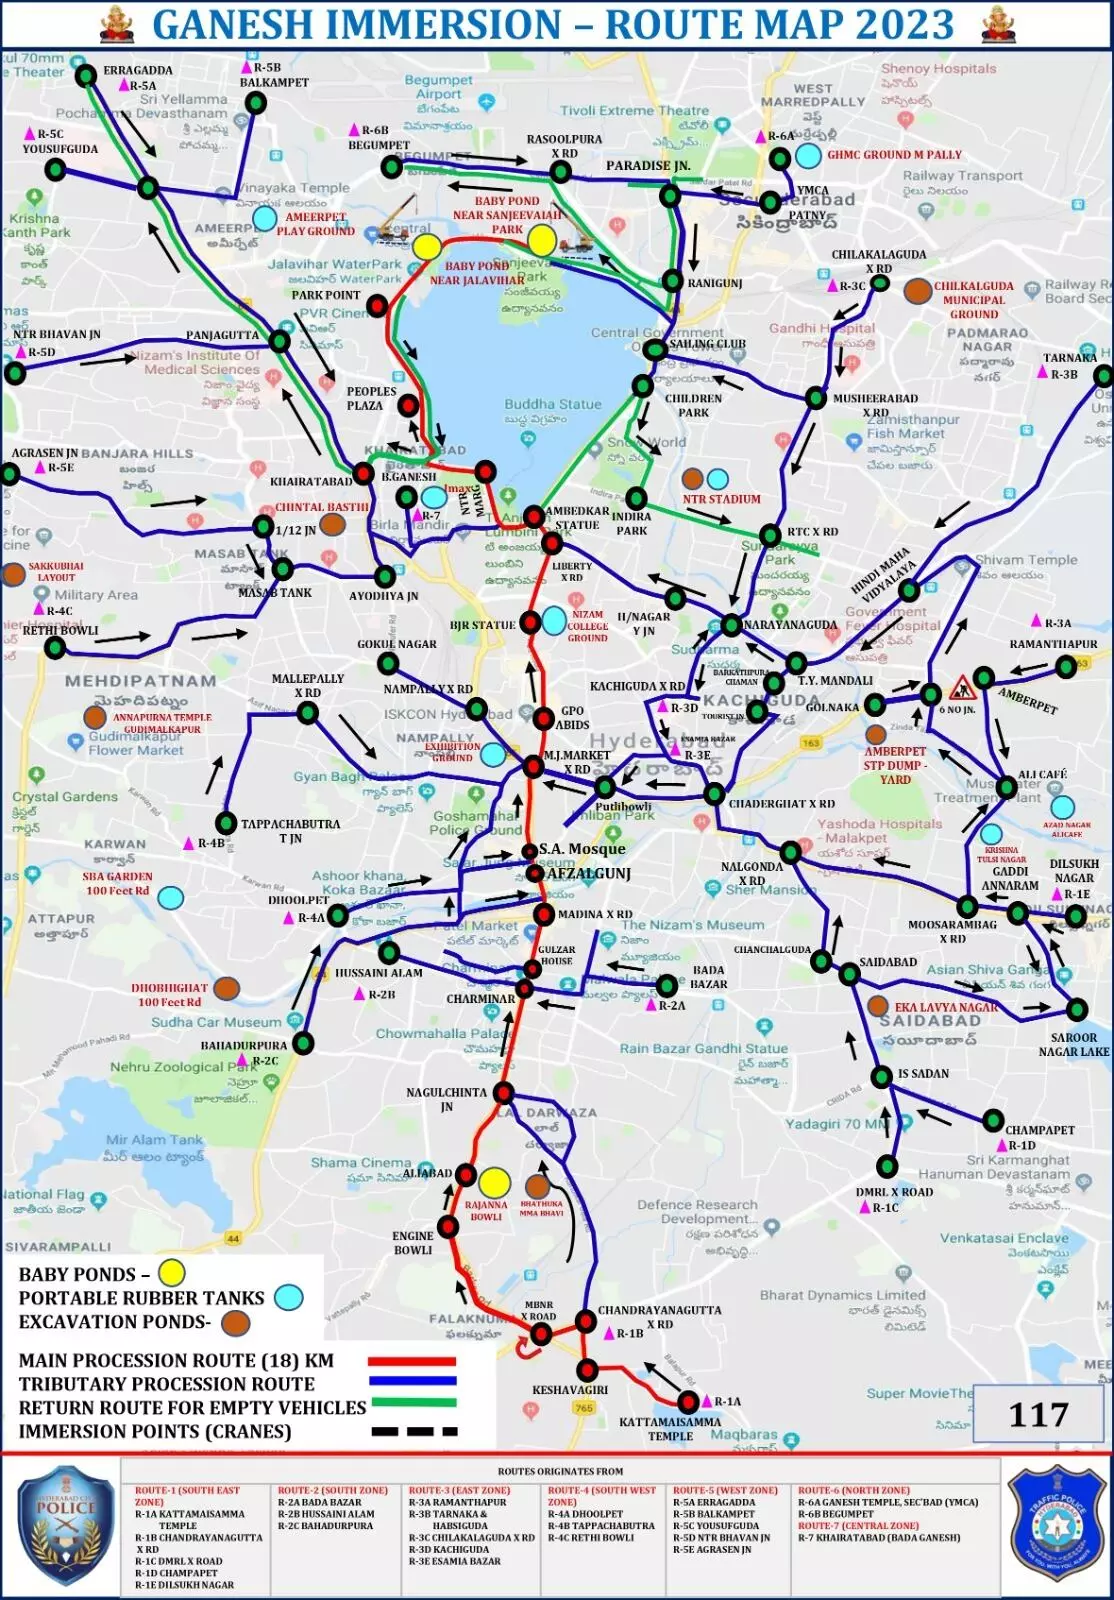 279 bus time schedule & line route map